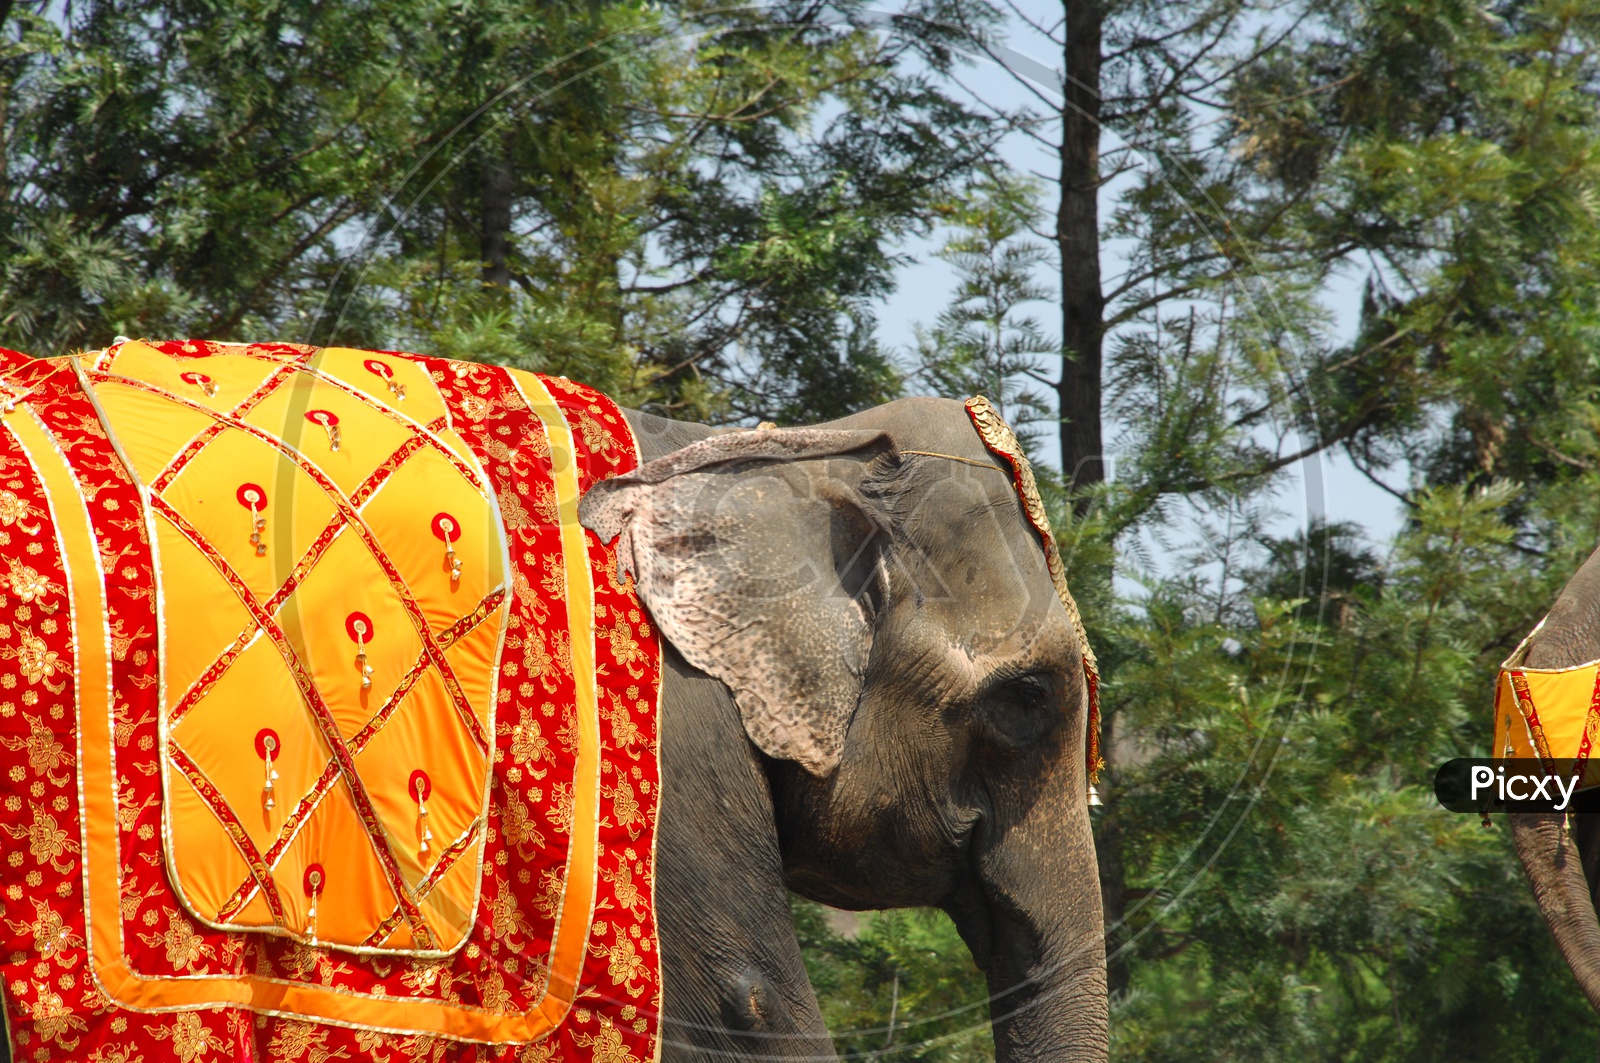 A Decorated Elephant